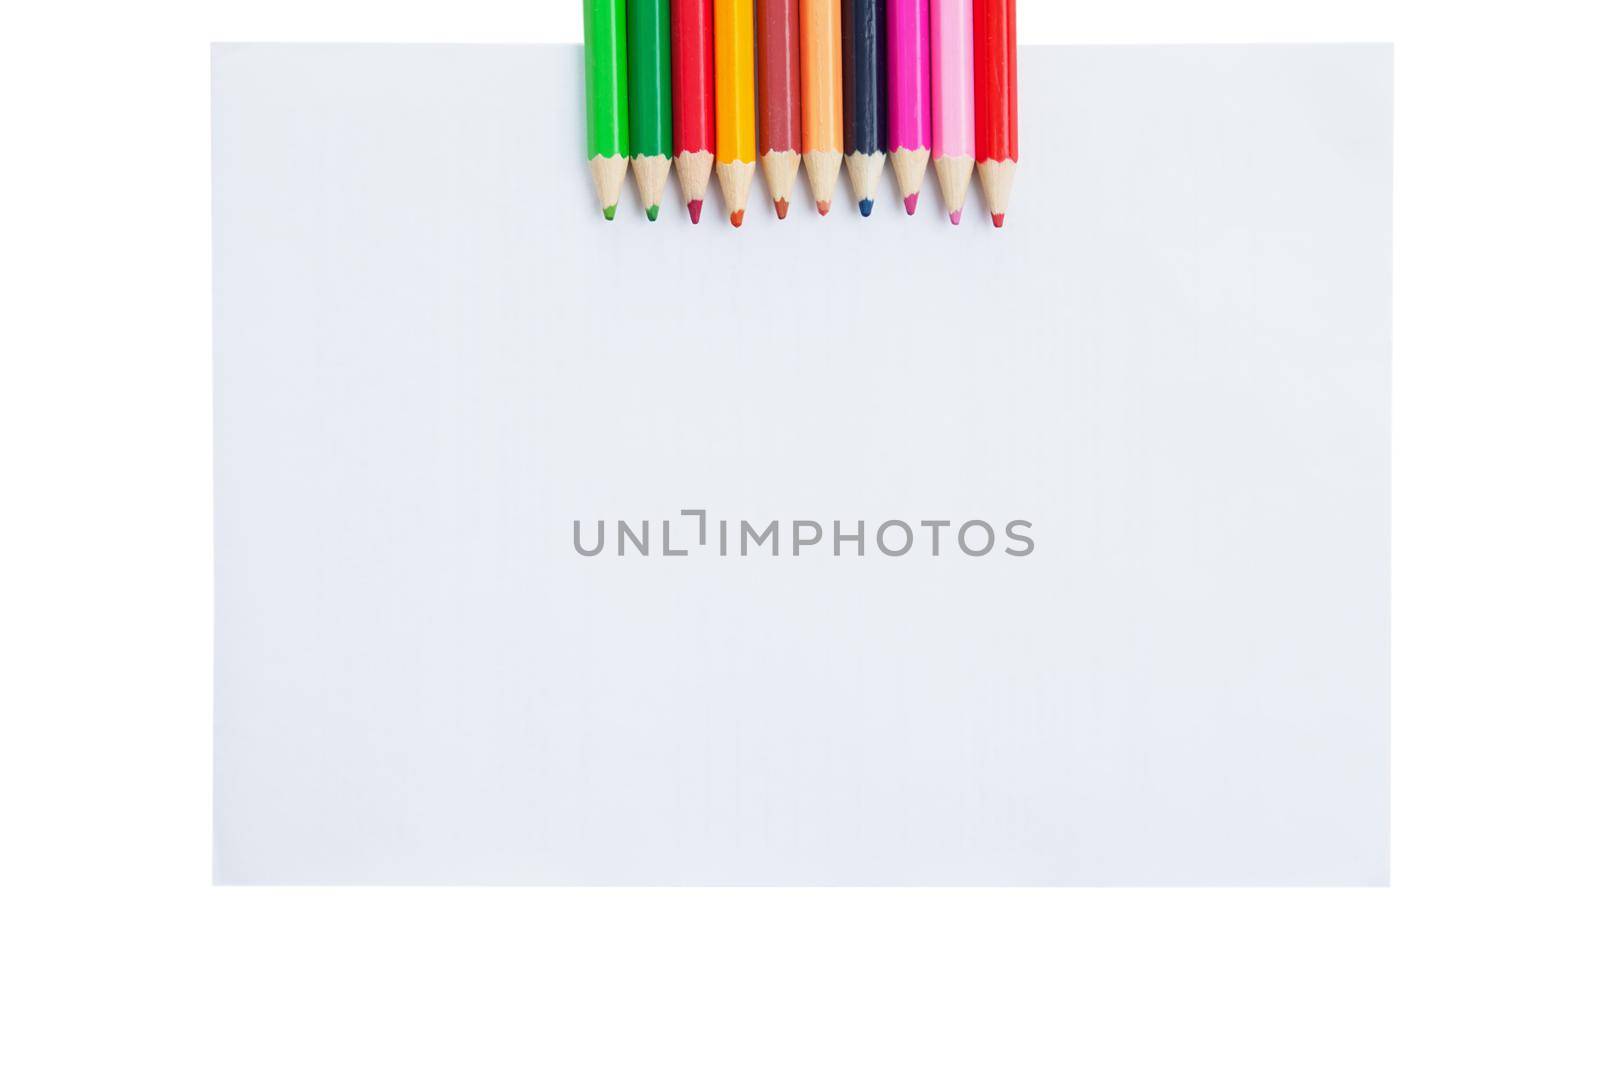 Colour pencils and paper blank isolated on white background by Julenochek